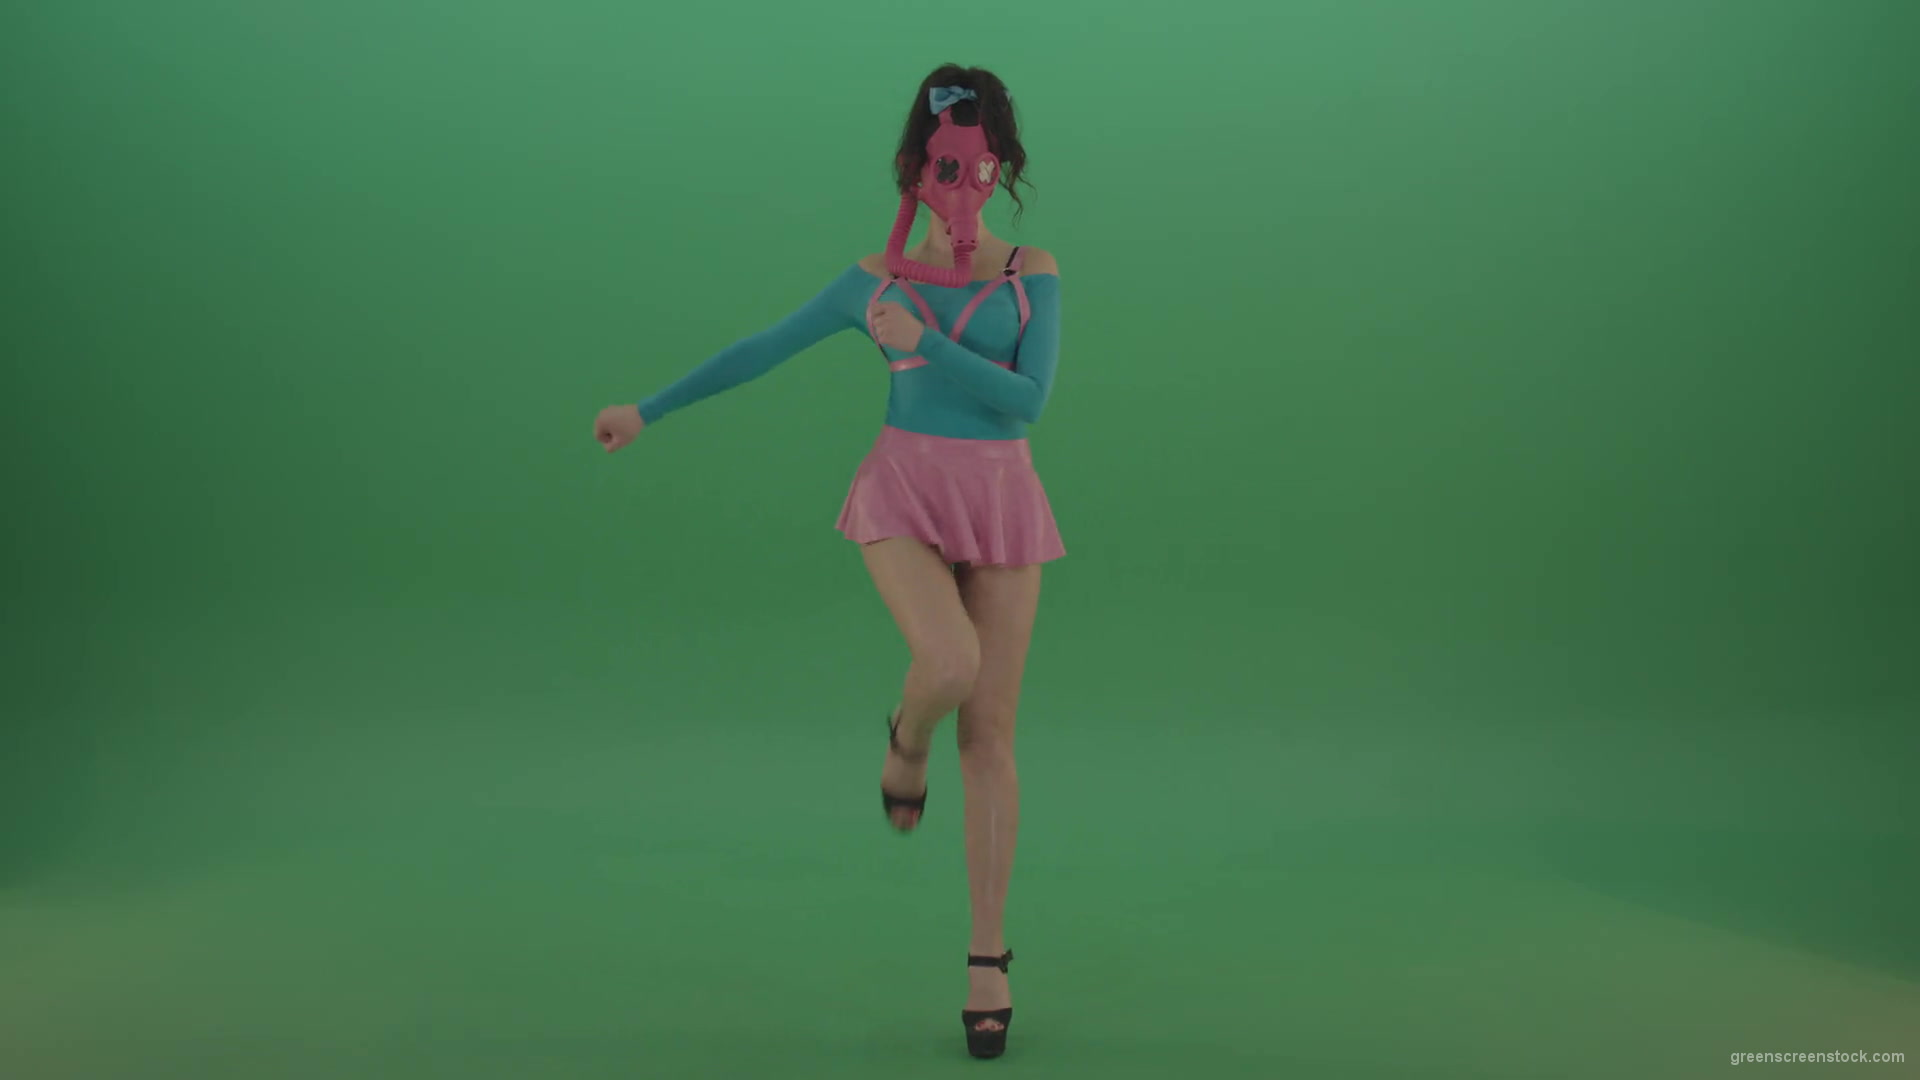 Sexy-Girl-in-Pink-Gas-Mask-marching-isolated-on-Green-Screen-4K-Video-Footage-1920_005 Green Screen Stock